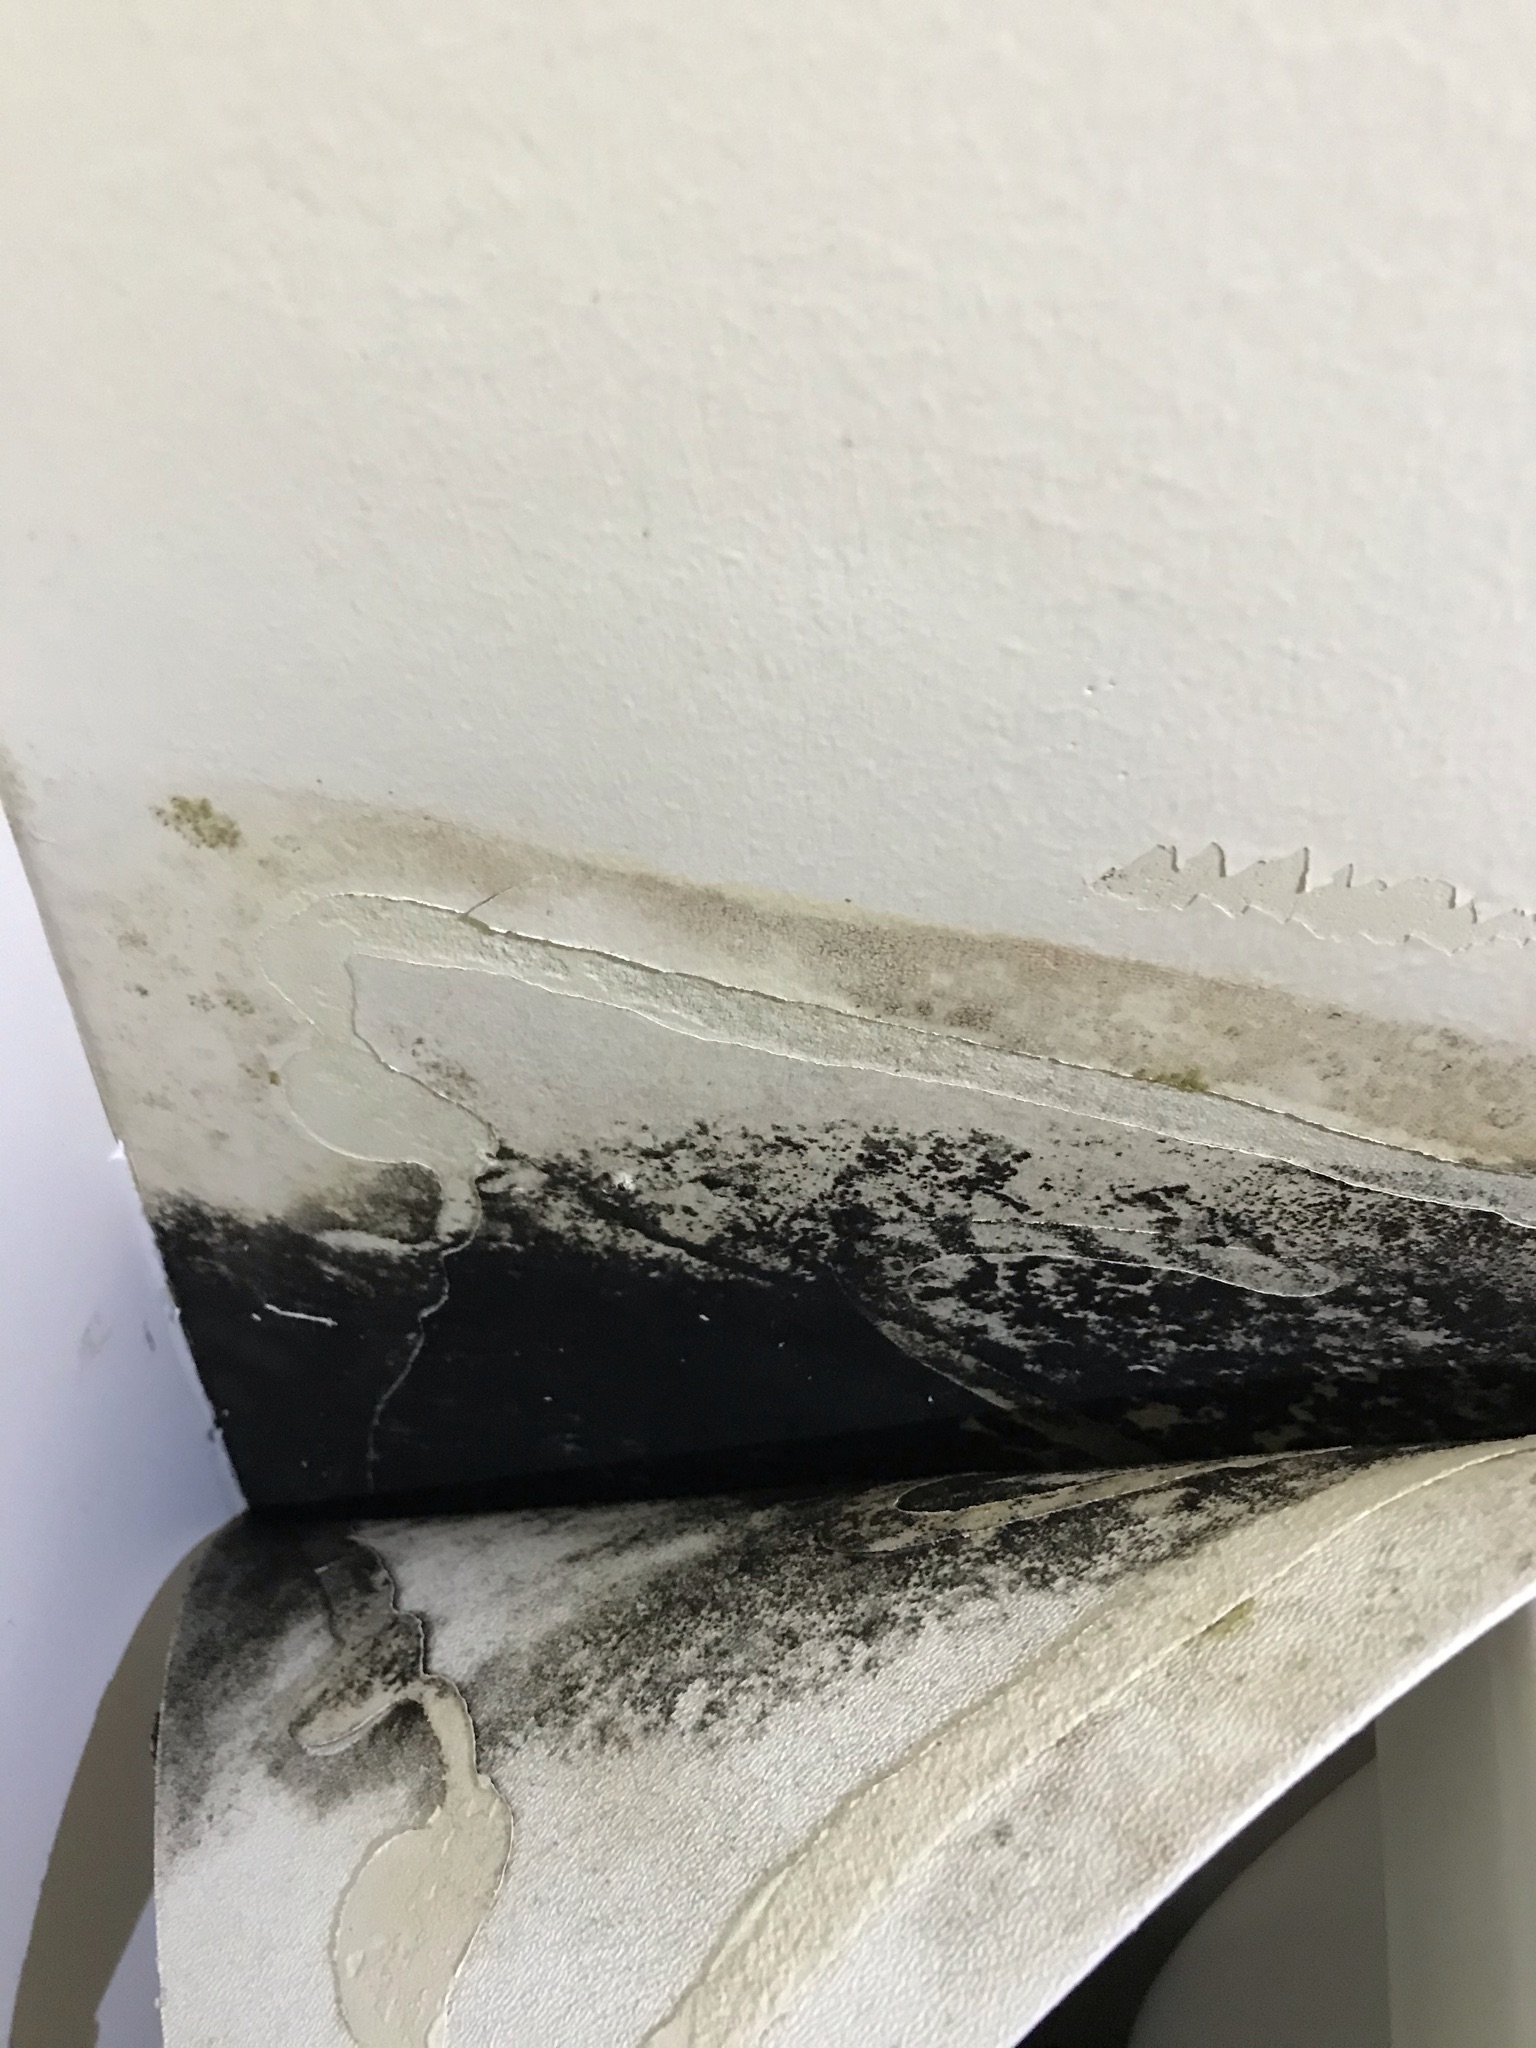 How To Test For Black Mold